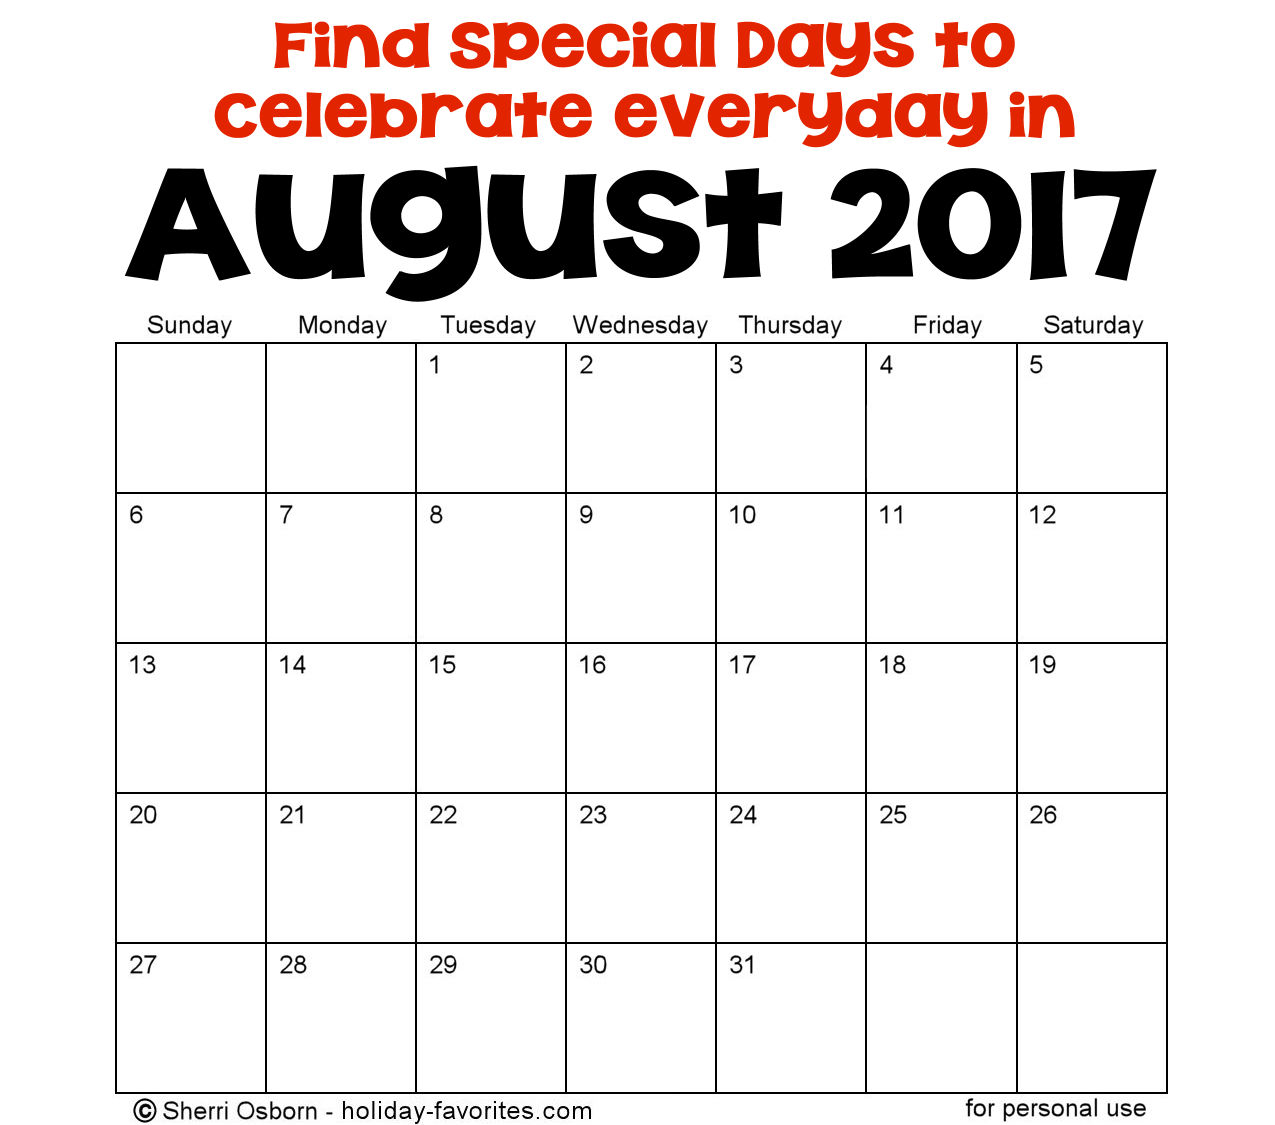 August Holidays and Special Days Holiday Favorites